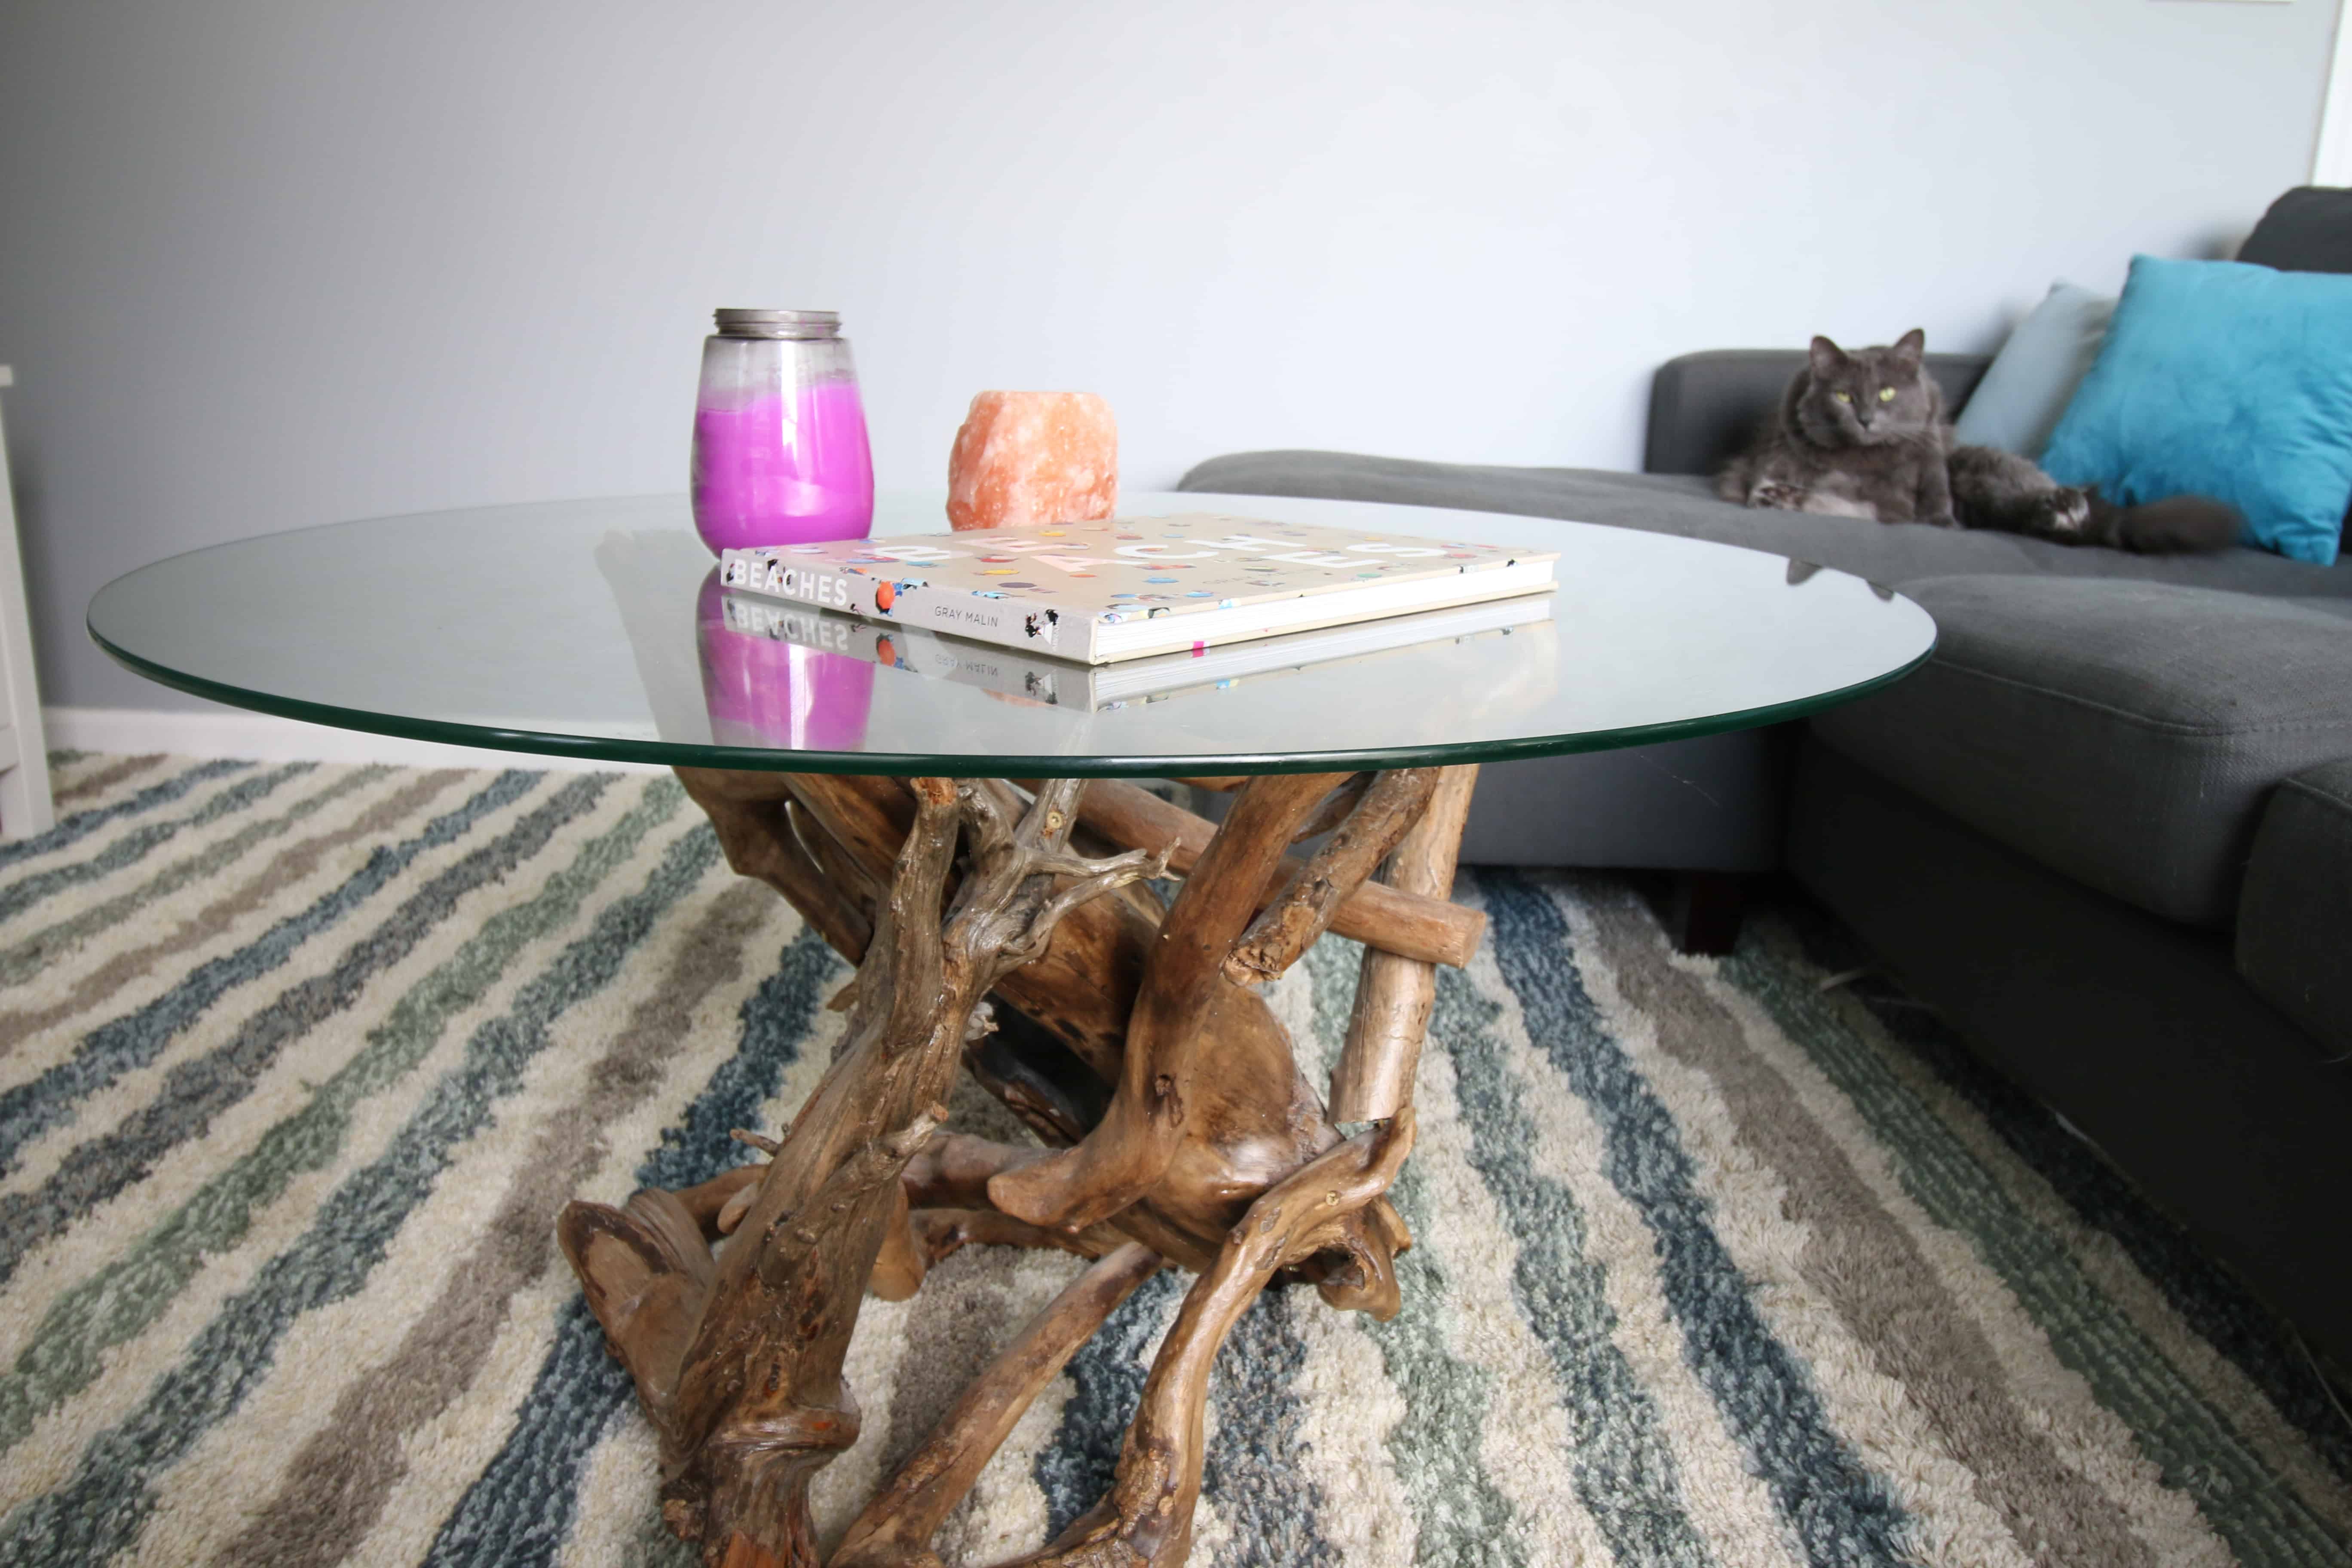 How To Make A Diy Driftwood Coffee Table, How To Make A Coffee Table Out Of Driftwood